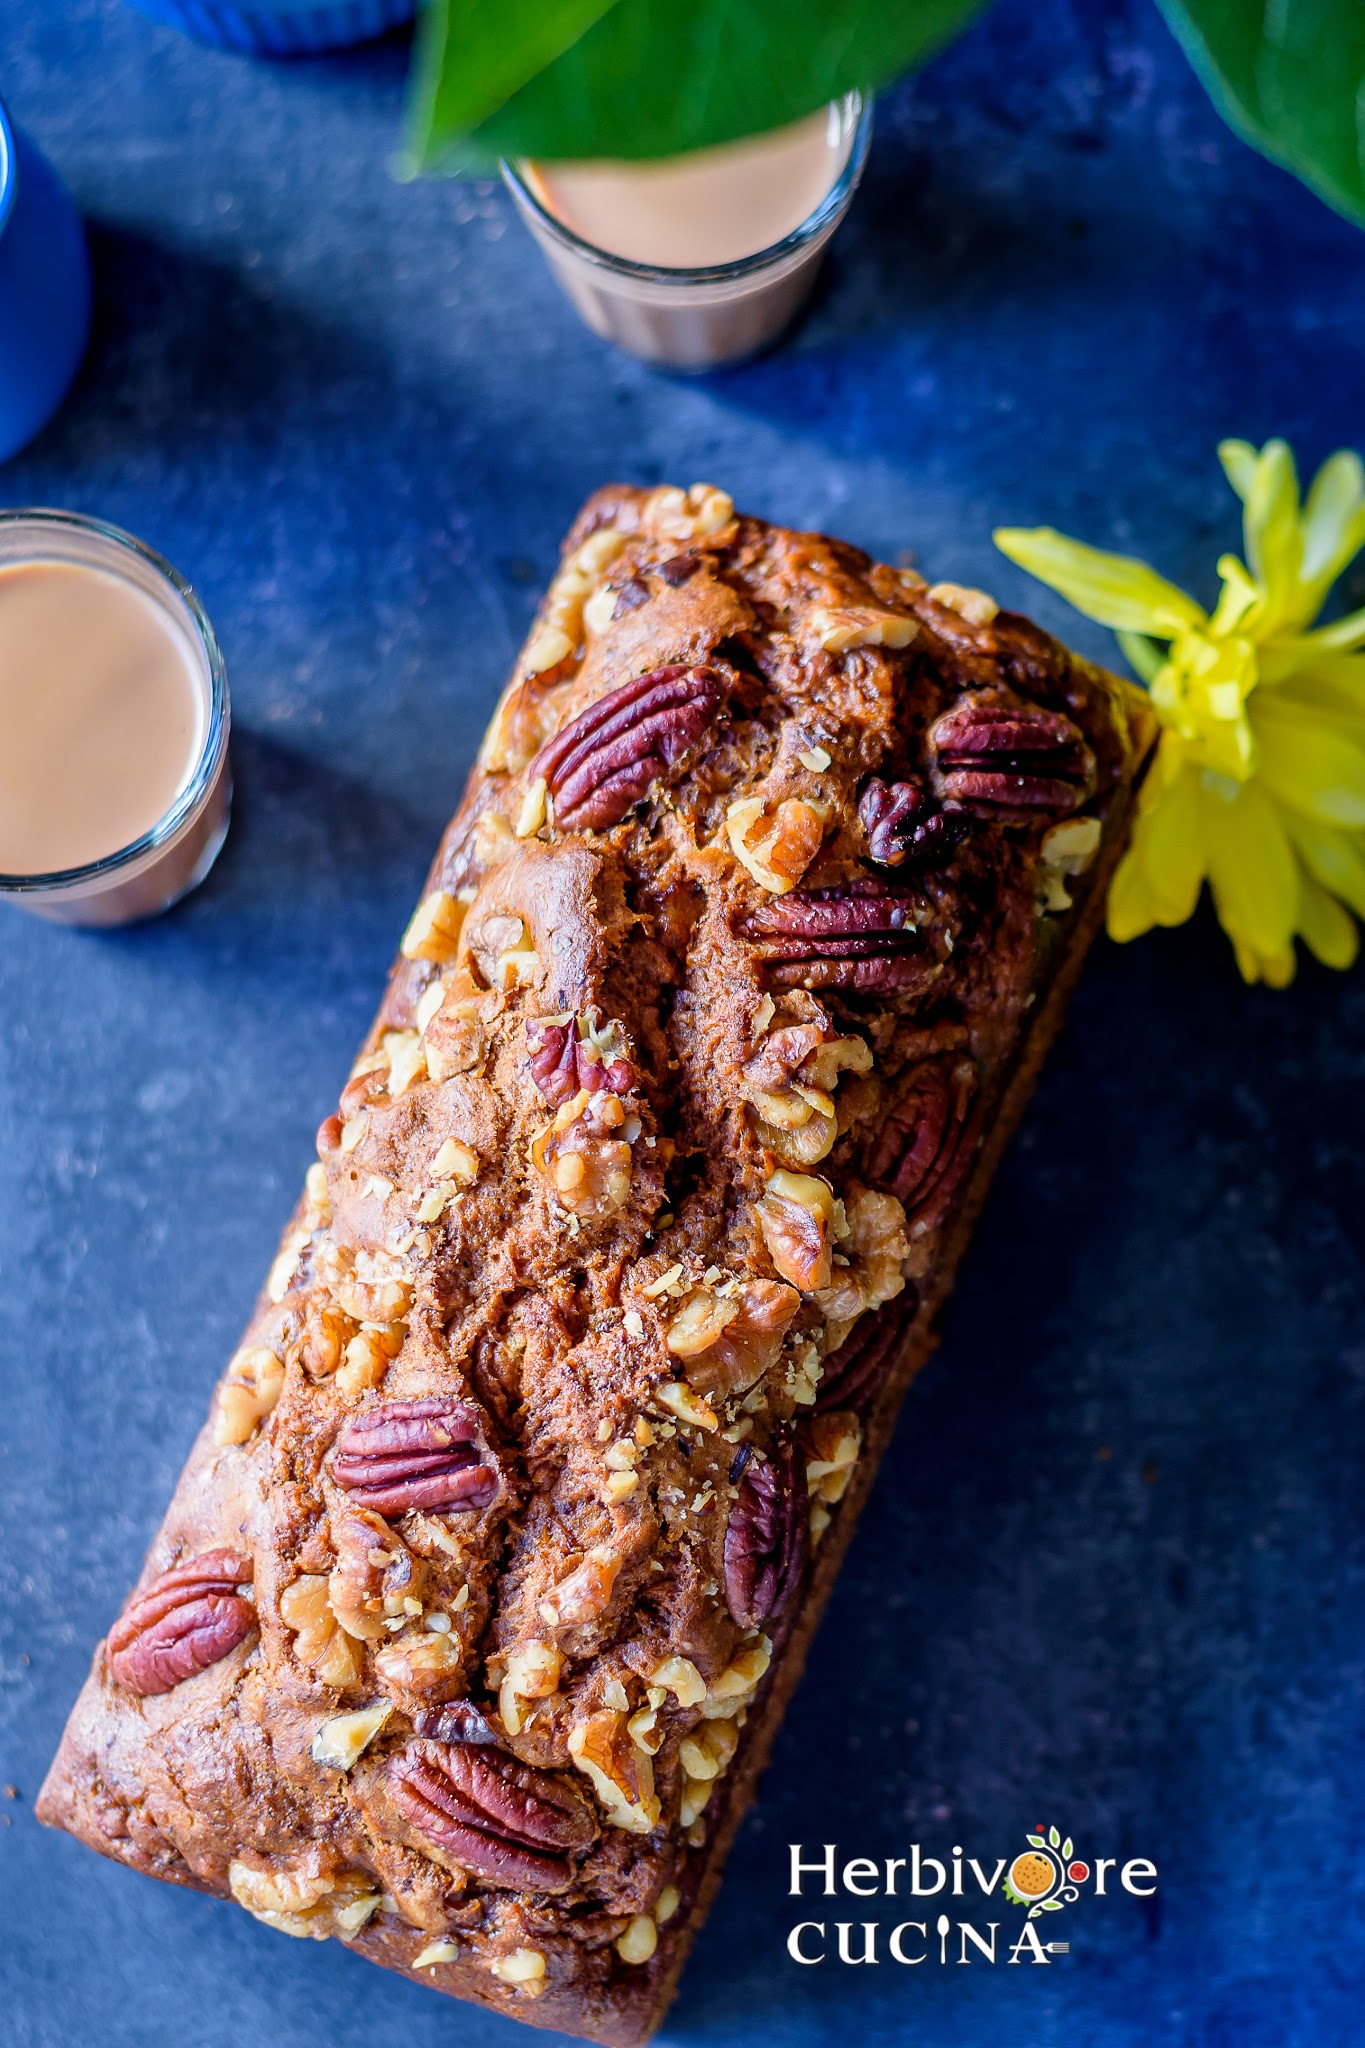 A loaf of Starbucks Banana Nut bread with coffee on the side and some flowers on a dark board.